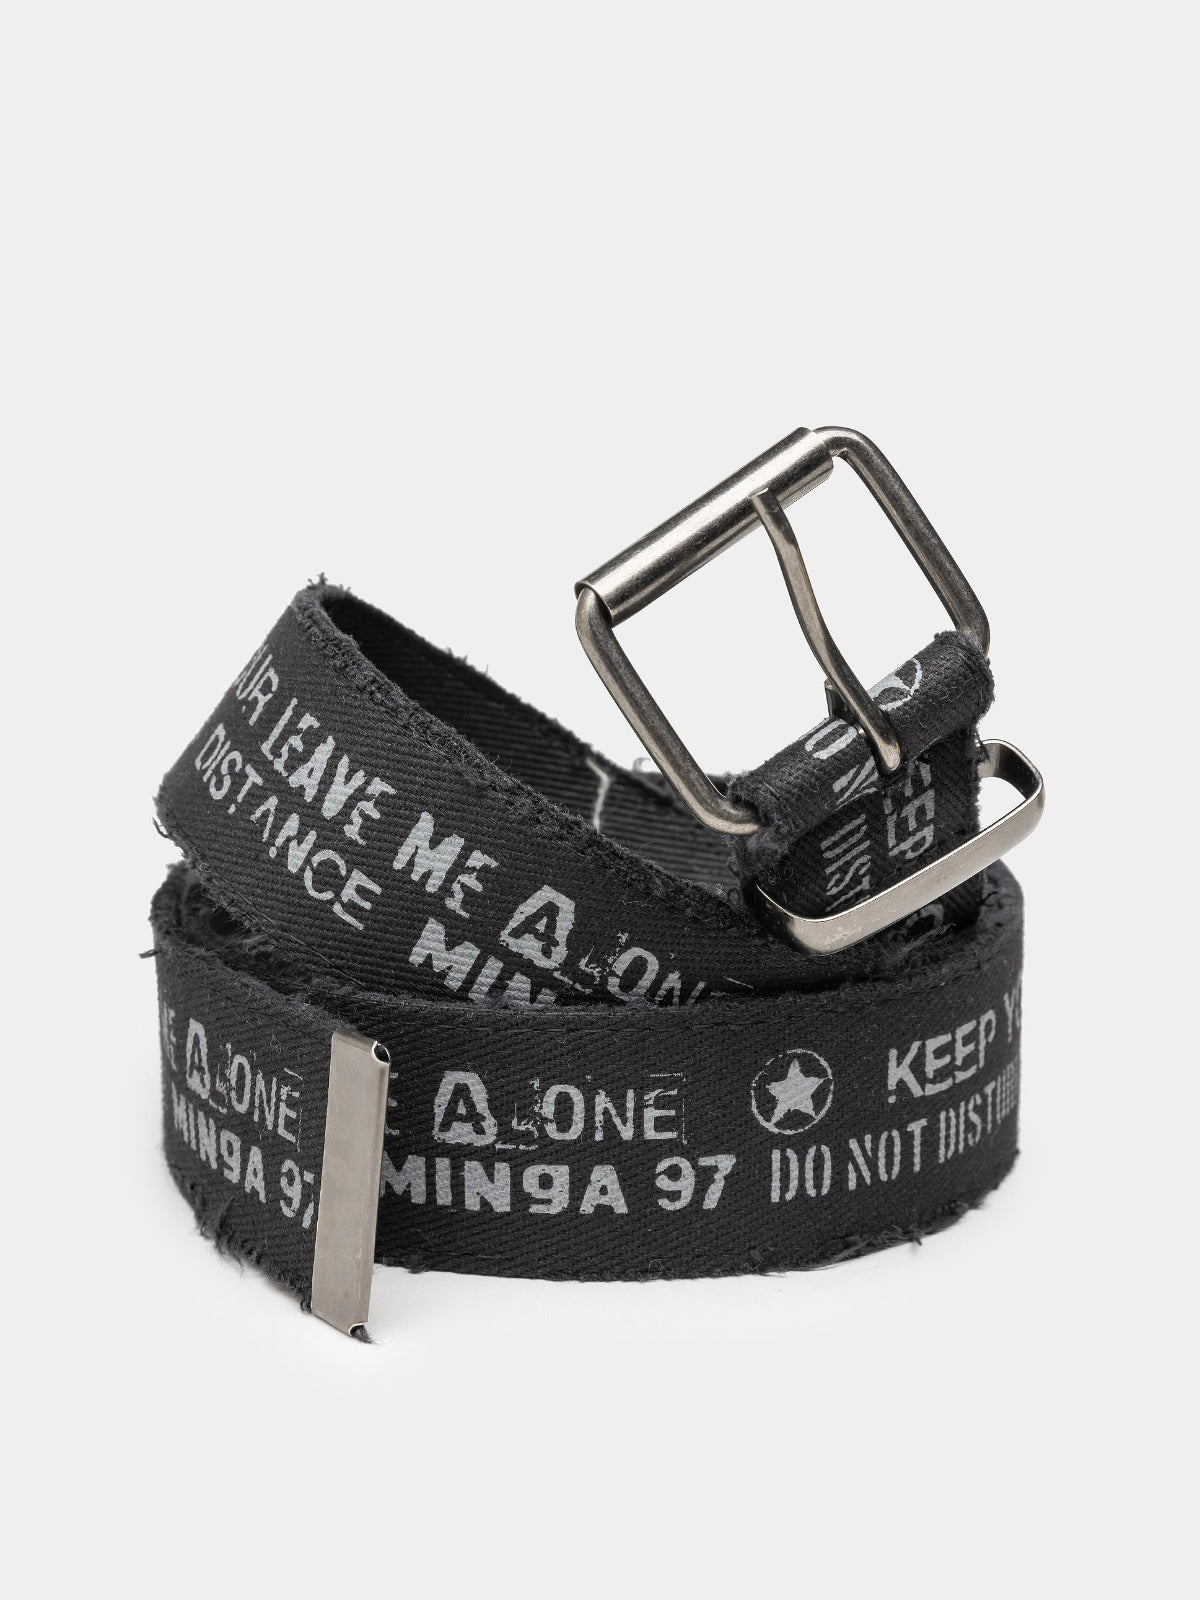 Black canvas belt by Minga London with "Do Not Disturb" text. Trendy and adjustable accessory for a fashionable touch to any outfit.